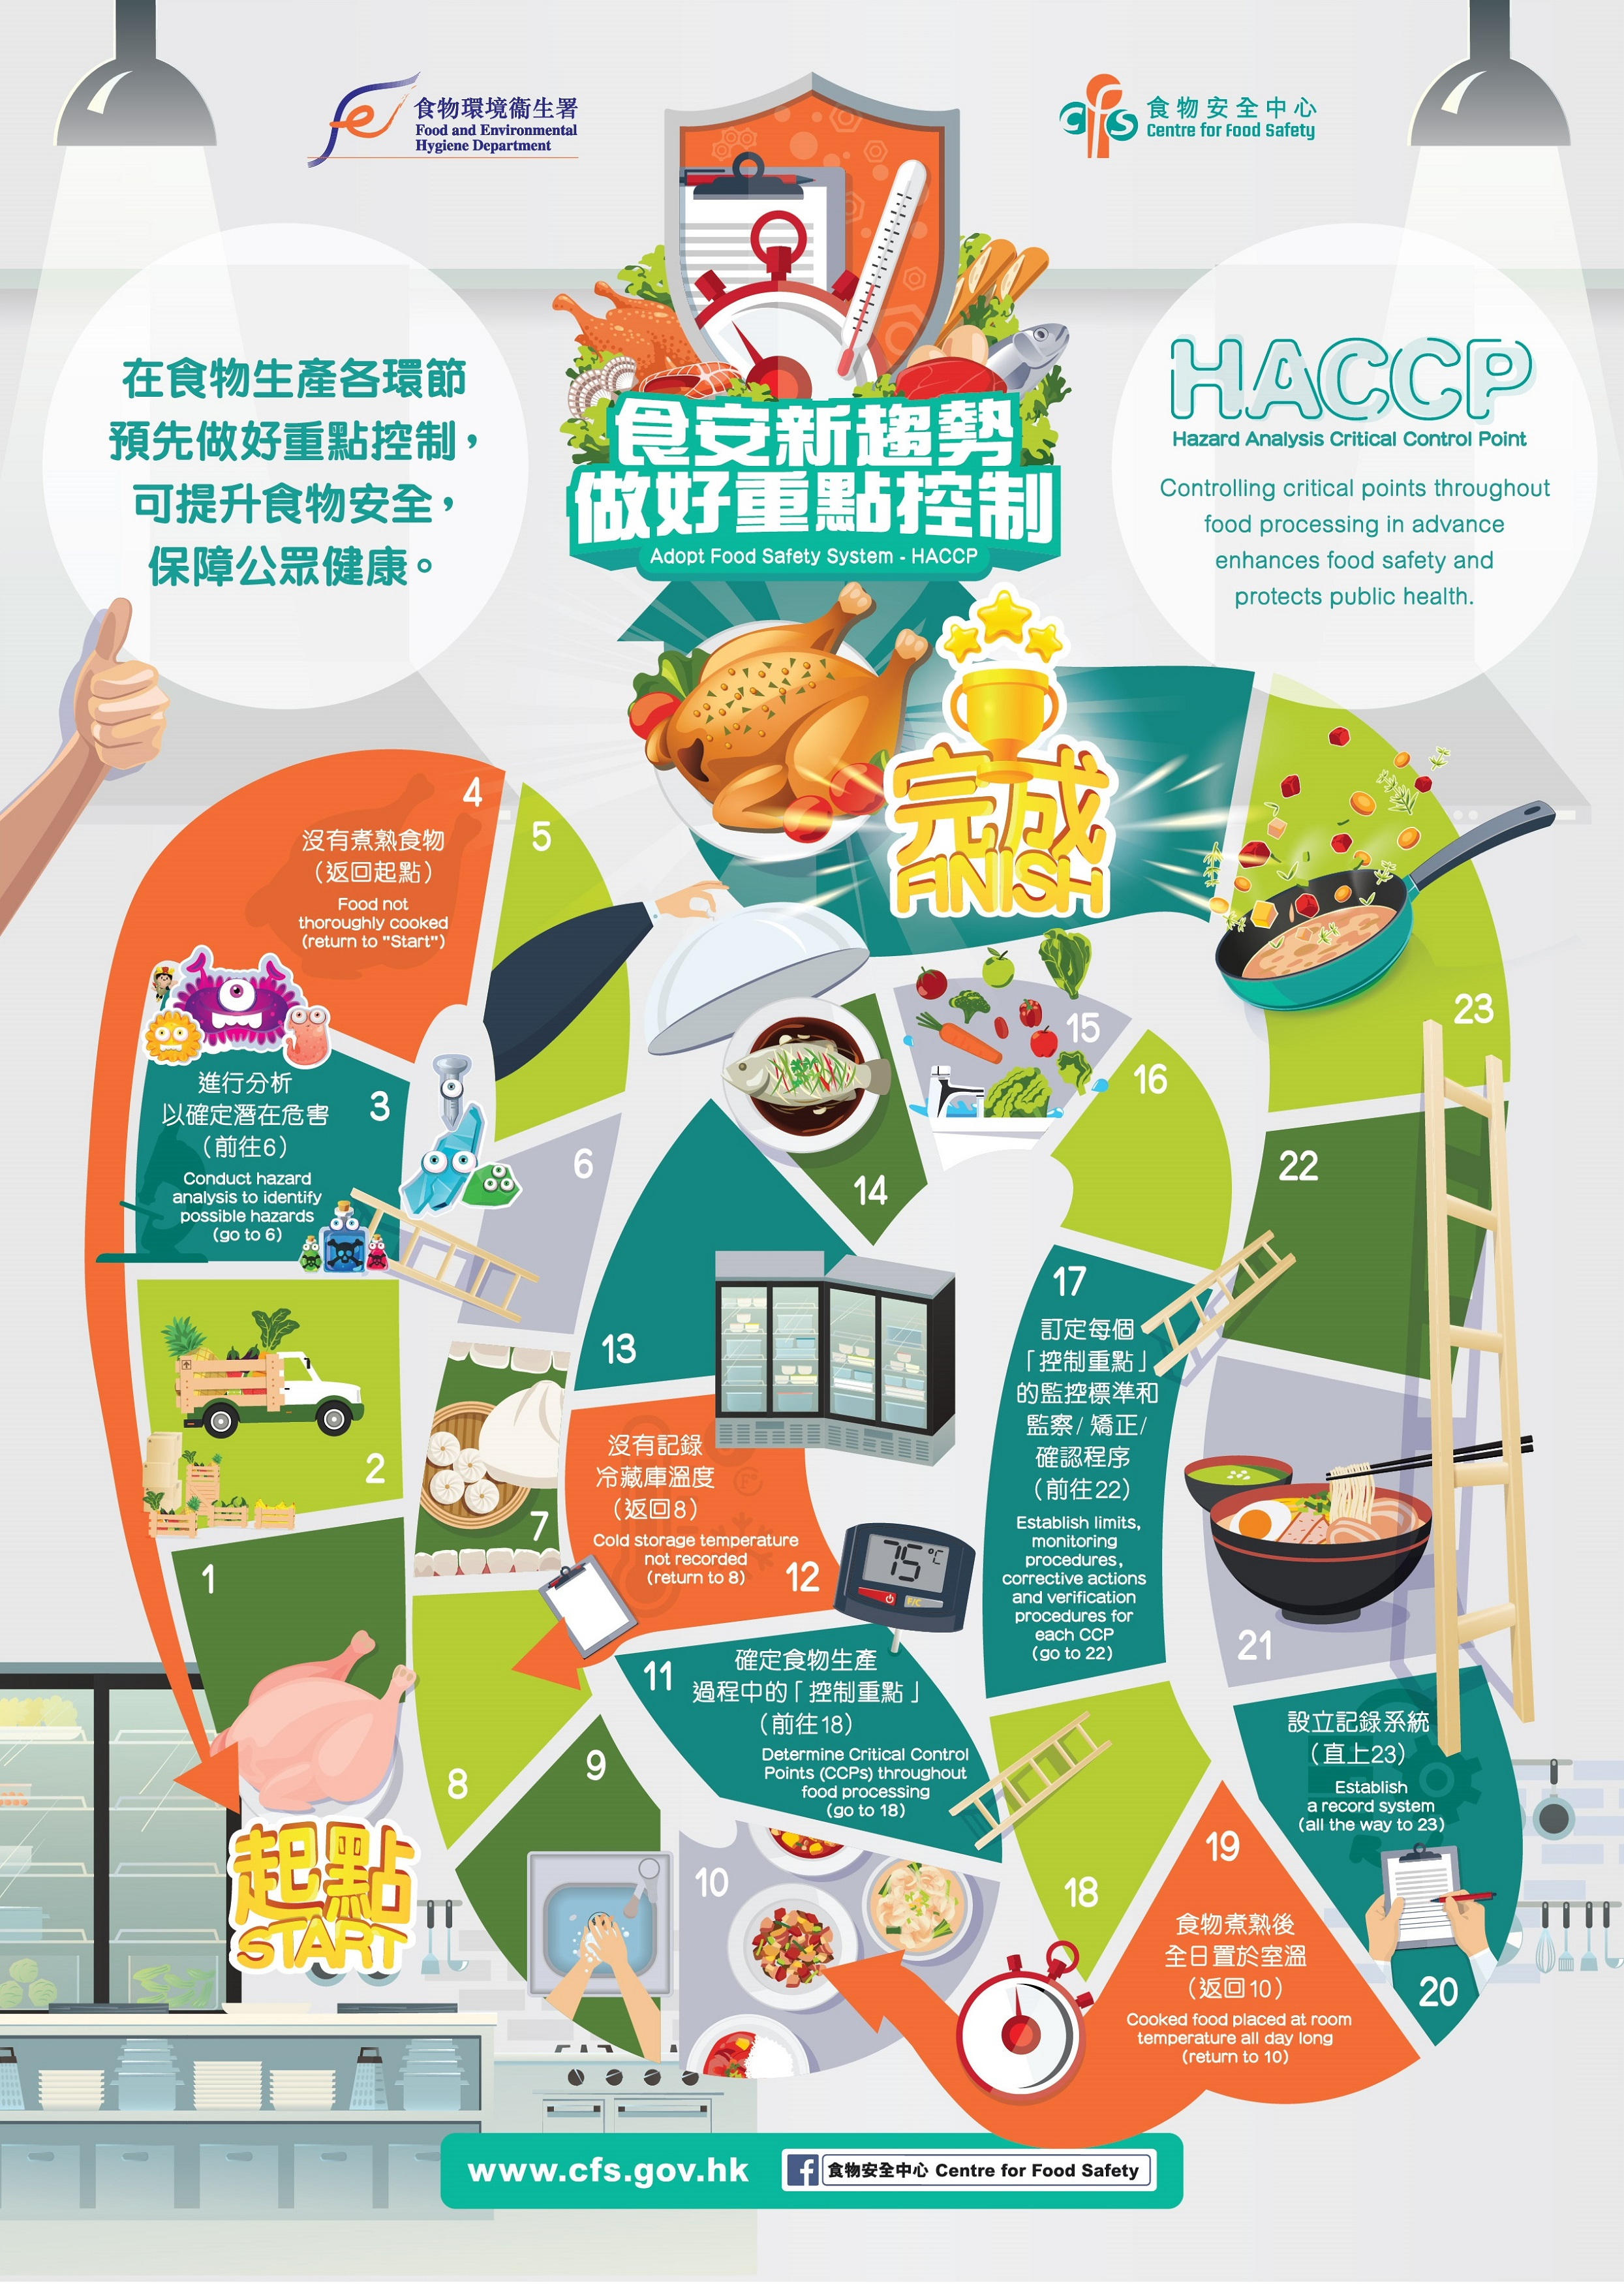 Adopt Food Safety System – HACCP